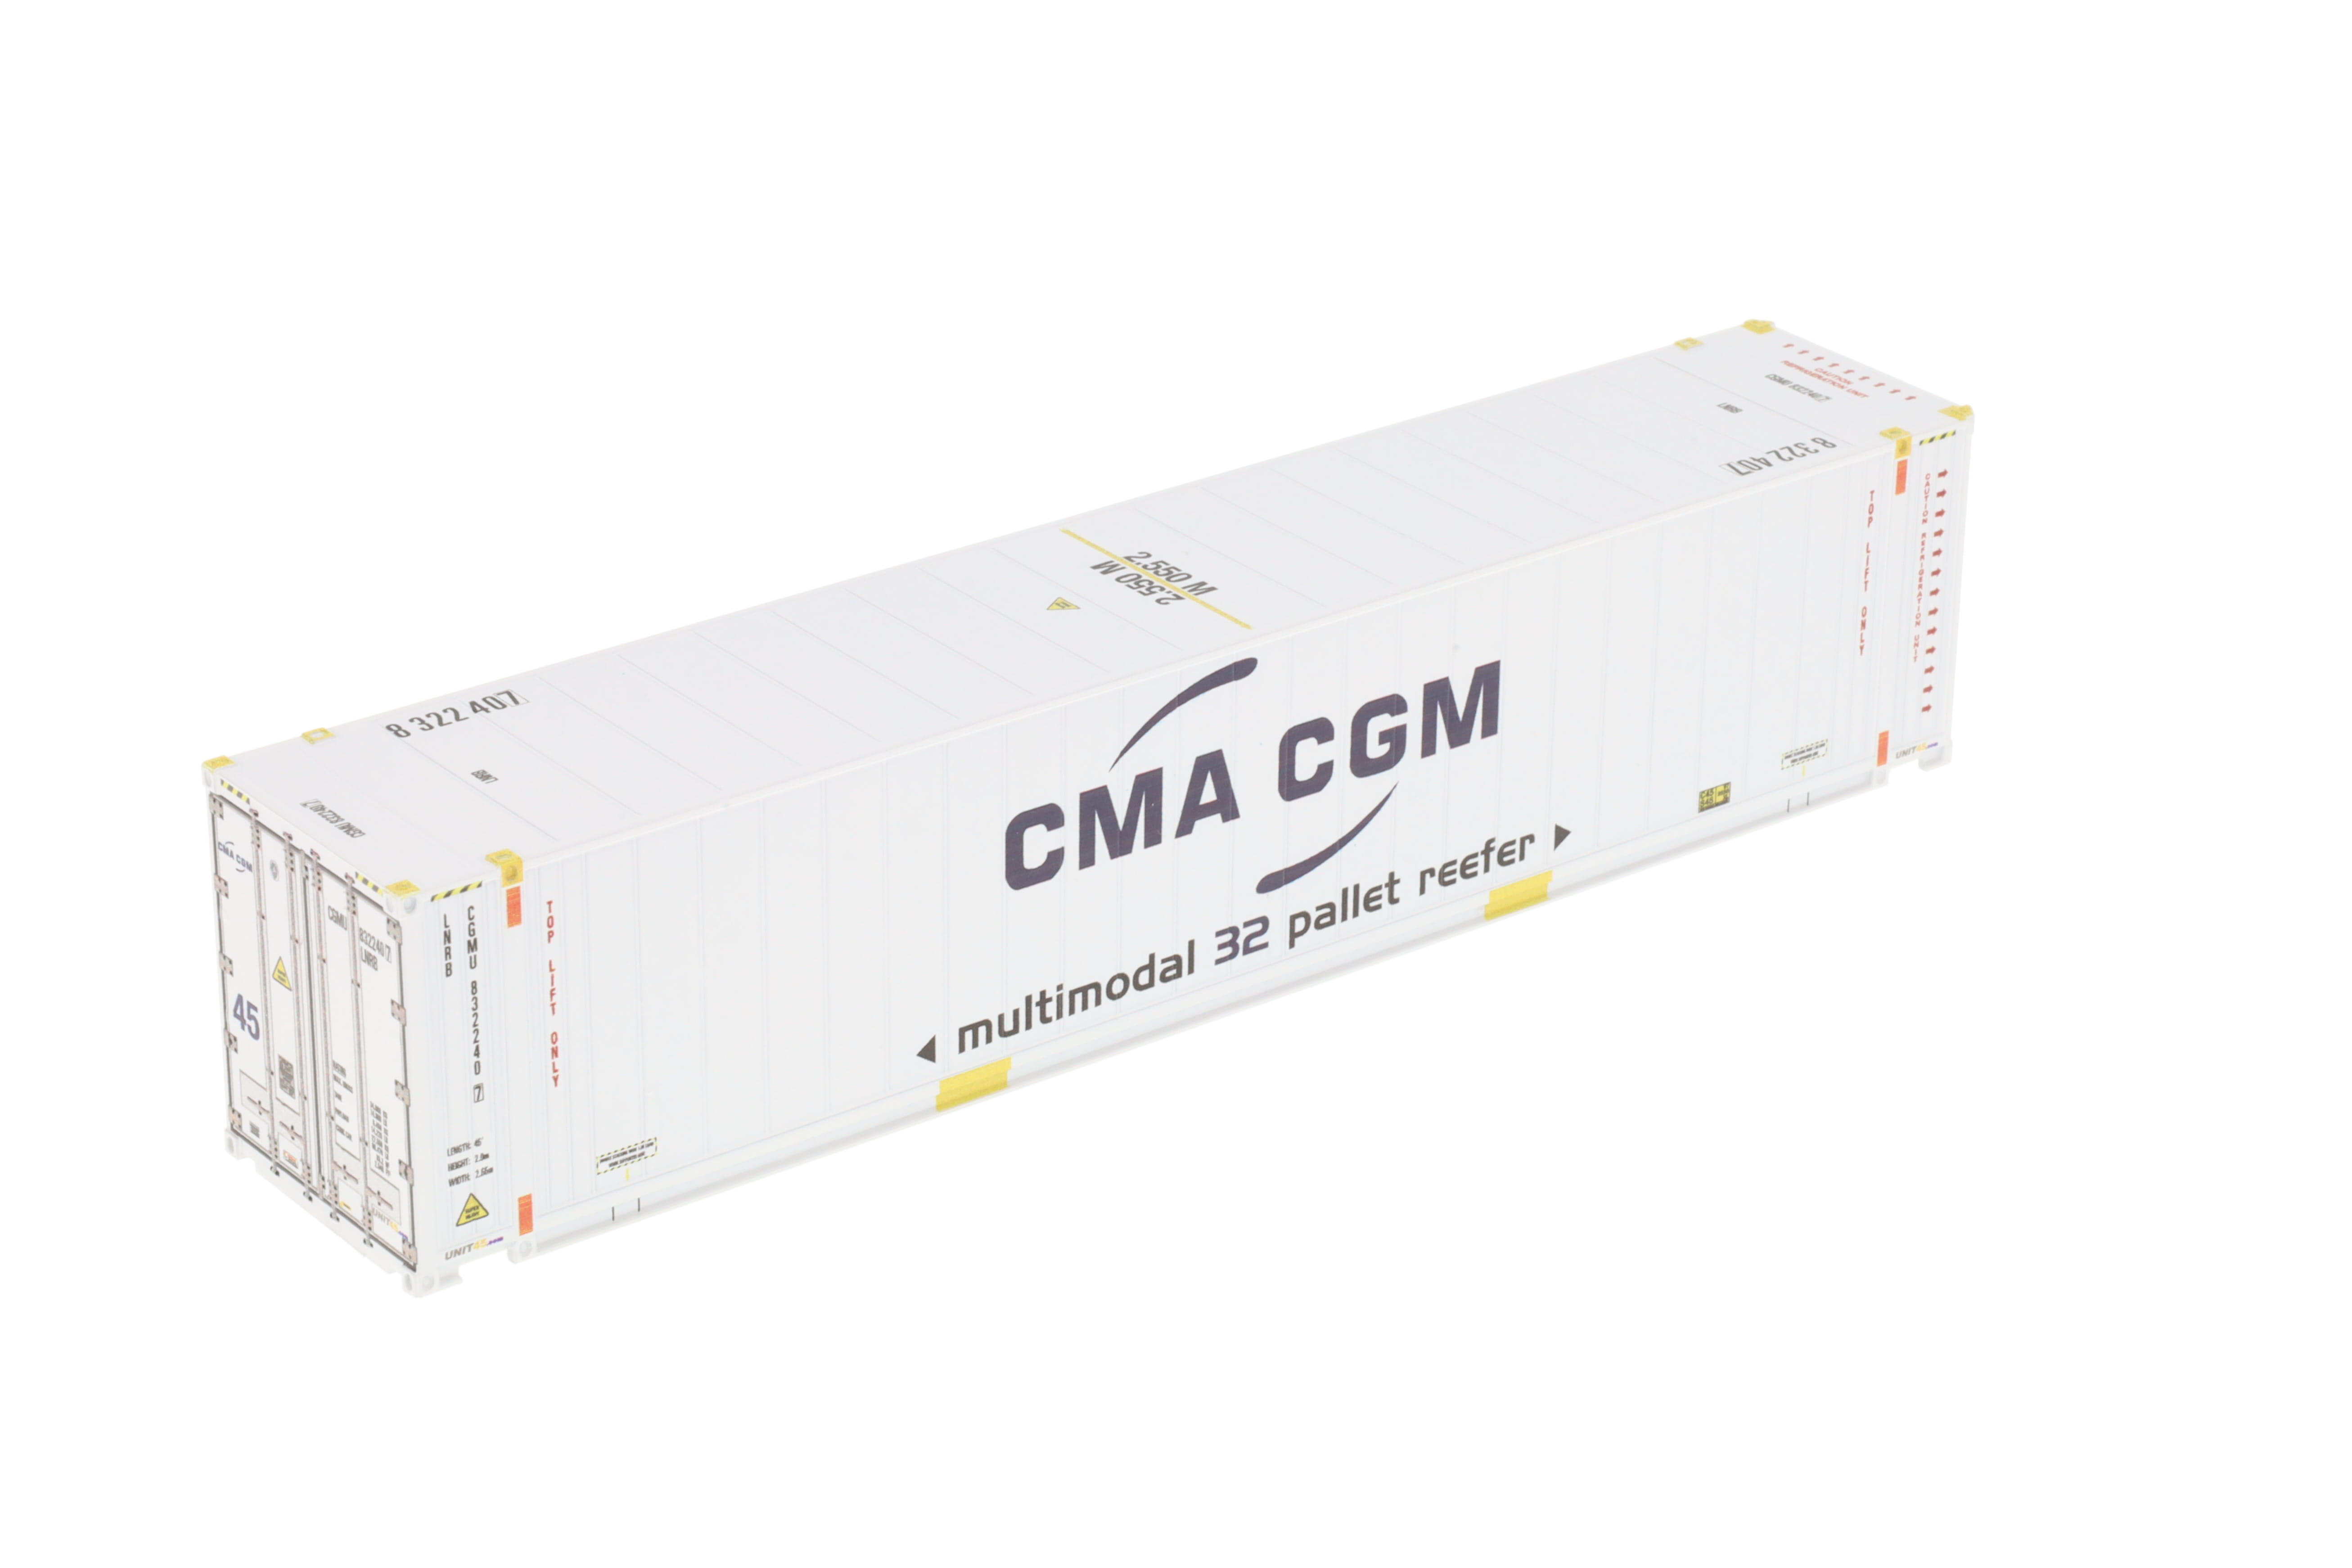 1:87 45´ Container CMA CGM WB-A / Ct45´ (Euro) Reefer (E), "multimodel 32 pallet reefer", UNit 45, # CGMU 832240